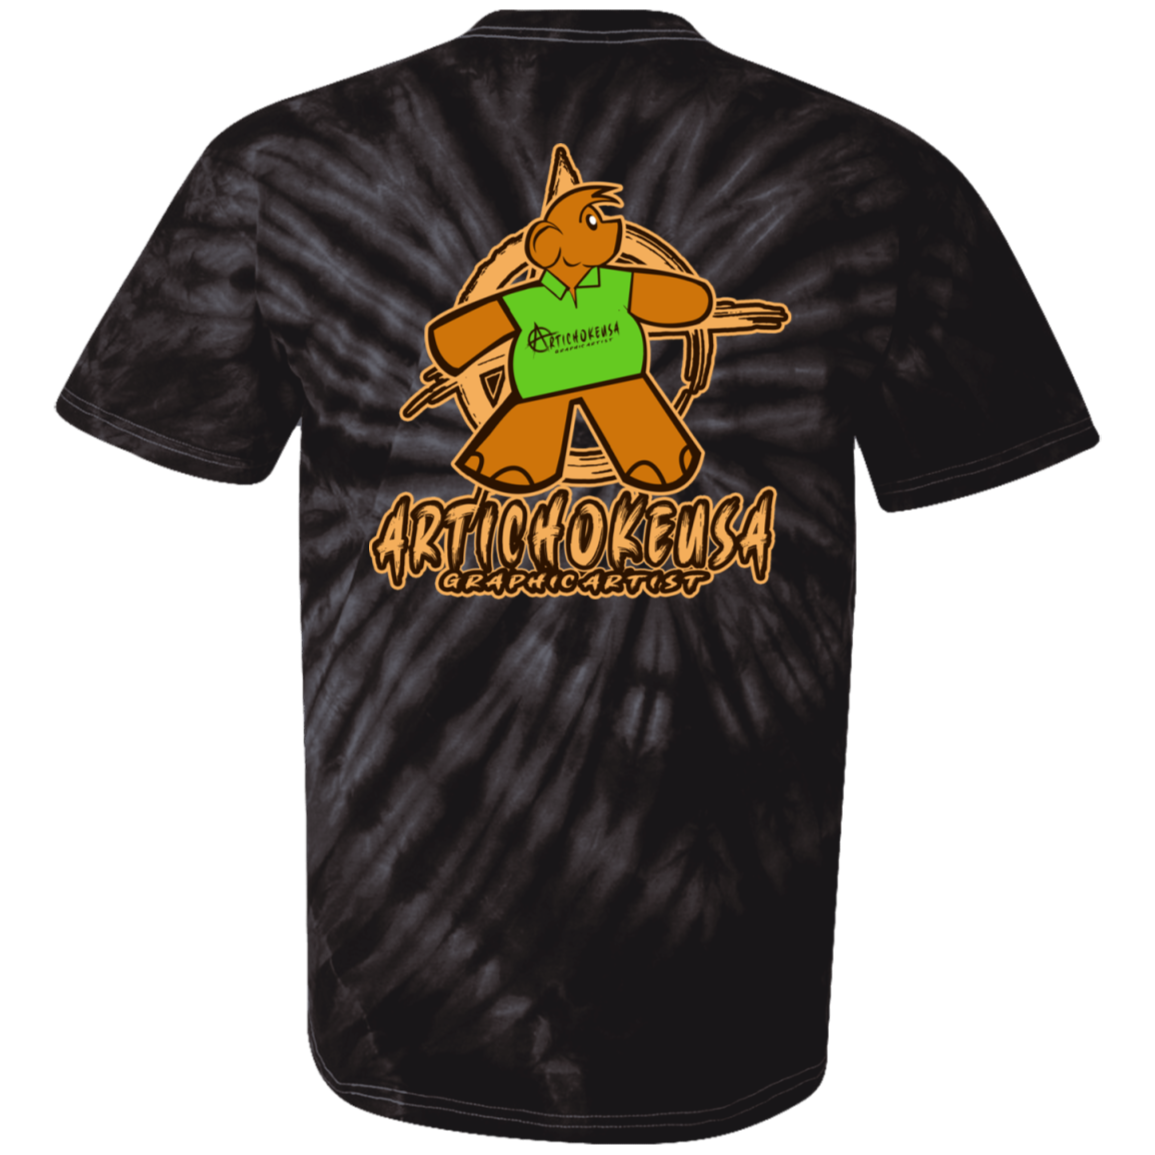 ArtichokeUSA Character and Font Design. Let’s Create Your Own Design Today. Winnie. 100% Cotton Tie Dye T-Shirt